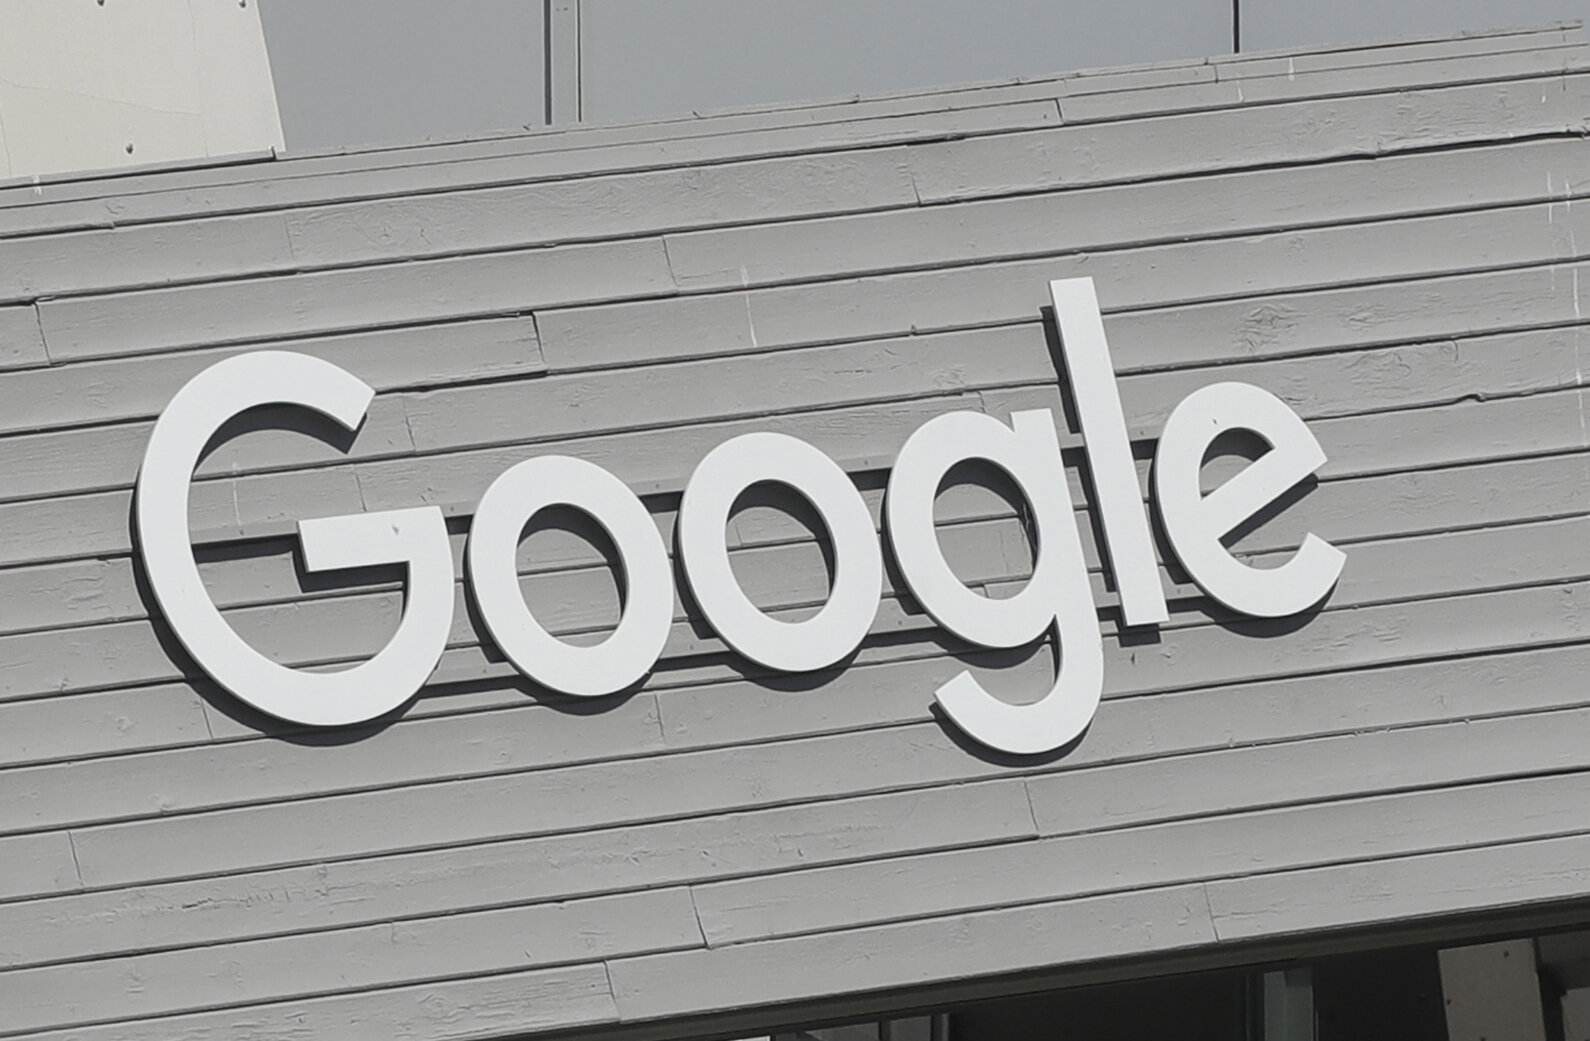 Beefing up its cybersecurity, Google buys Mandiant for $5.4B